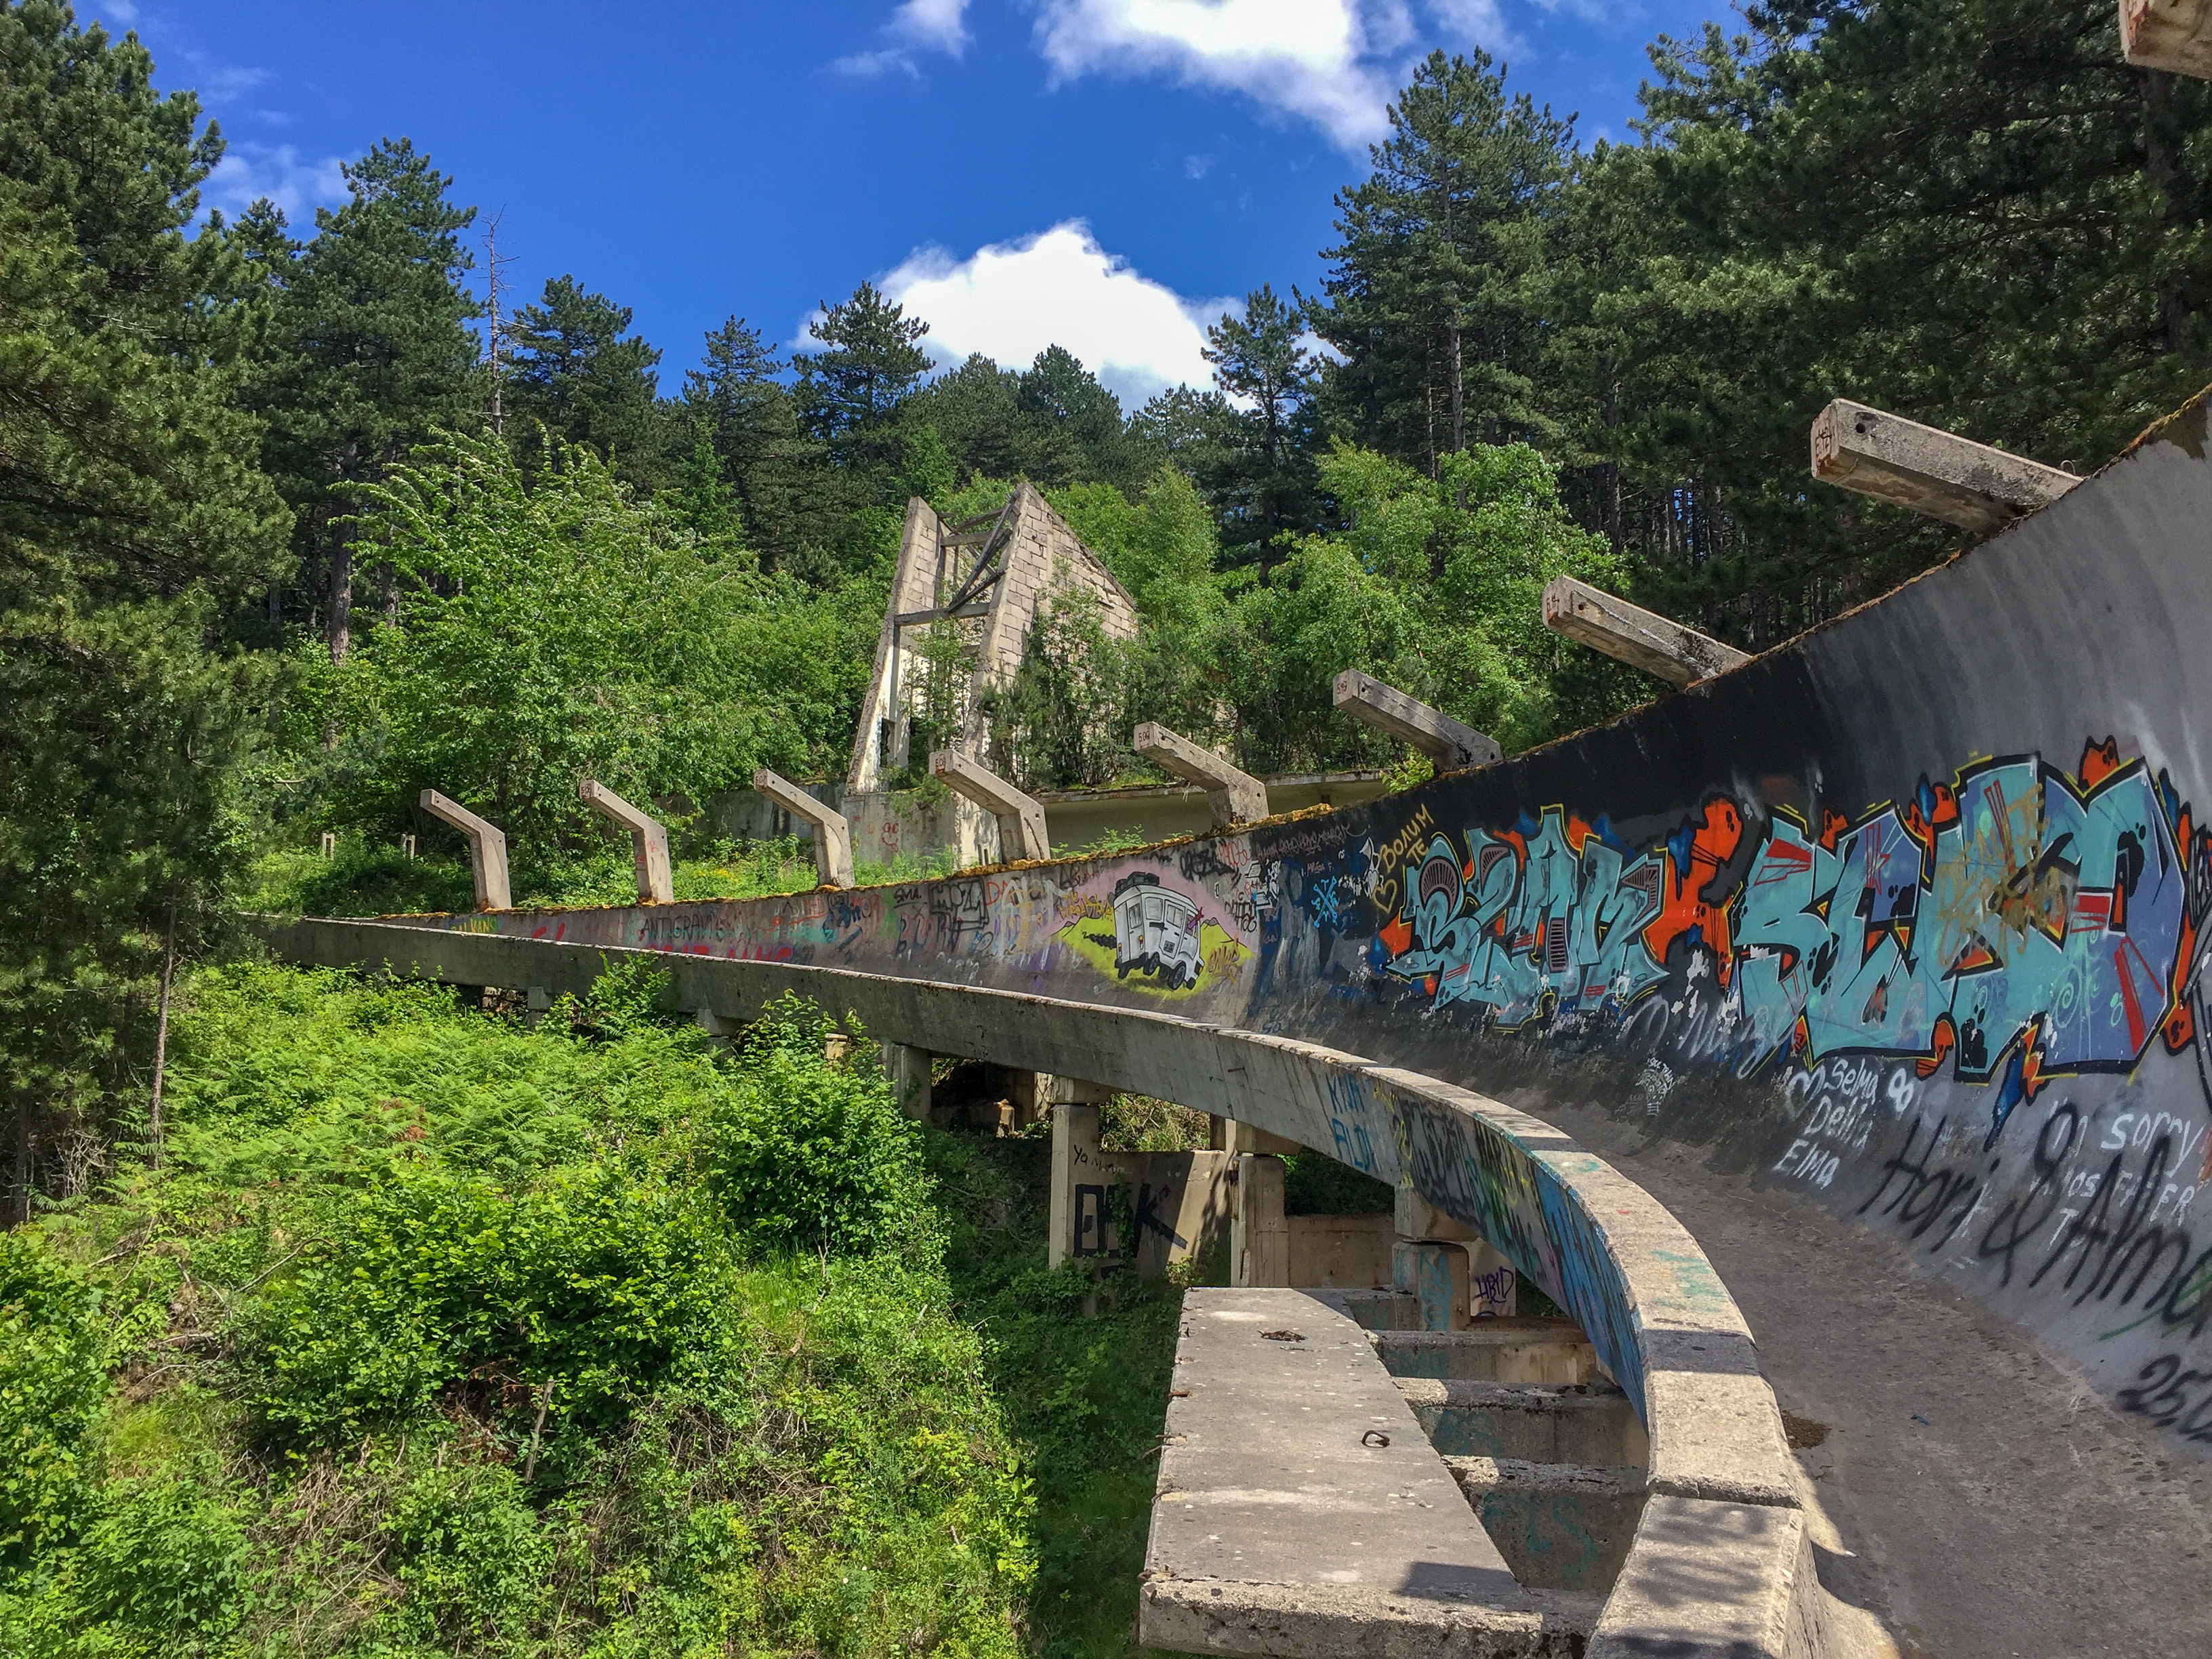 Sarajevo Olympic Bobsleigh and Luge Track – Lost in the Right Direction